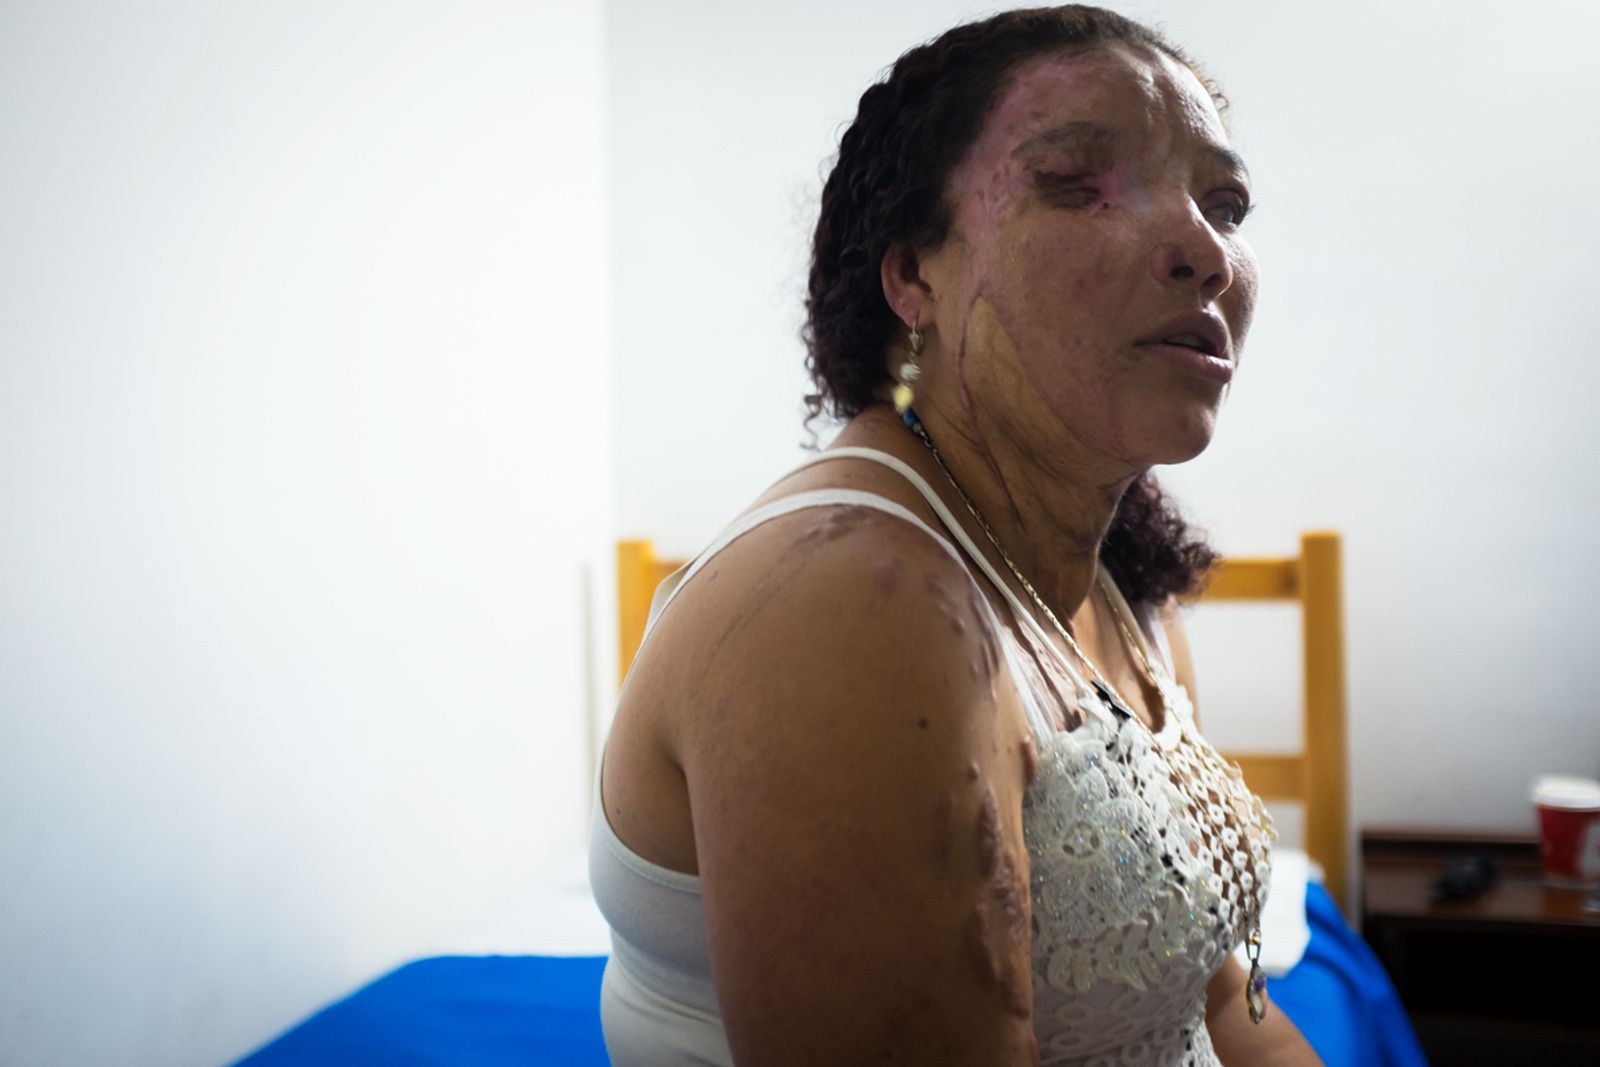 © Betty Laura Zapata - Image from the Facing Up: Acid Attacks in Colombia  photography project